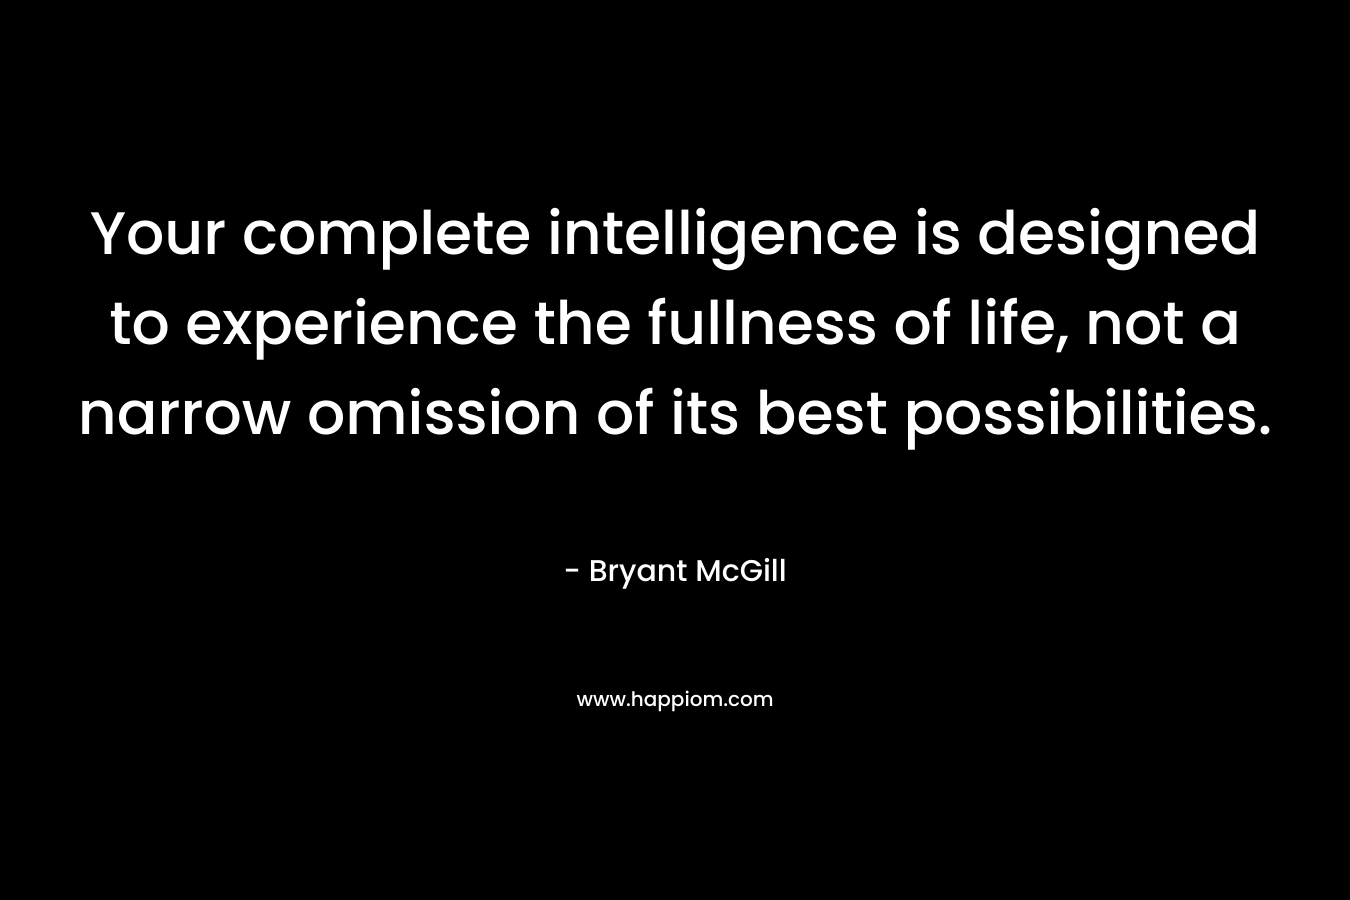 Your complete intelligence is designed to experience the fullness of life, not a narrow omission of its best possibilities. – Bryant McGill